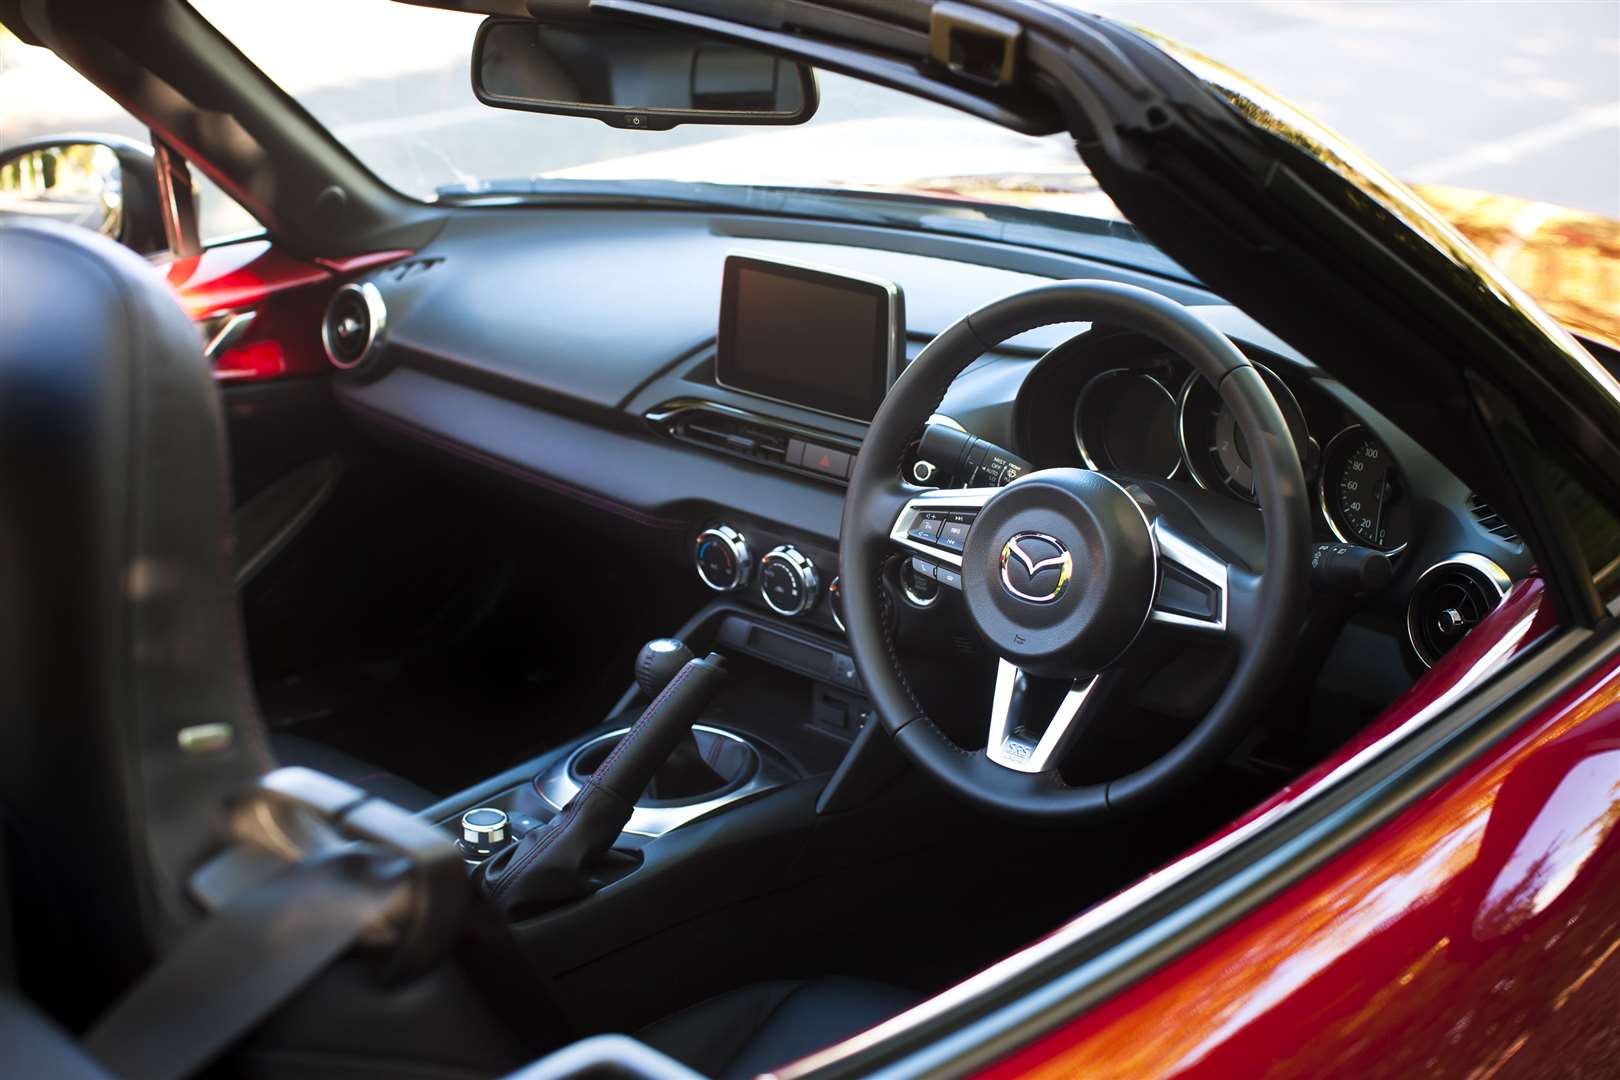 The no-fuss cockpit is reminiscent of the first MX-5